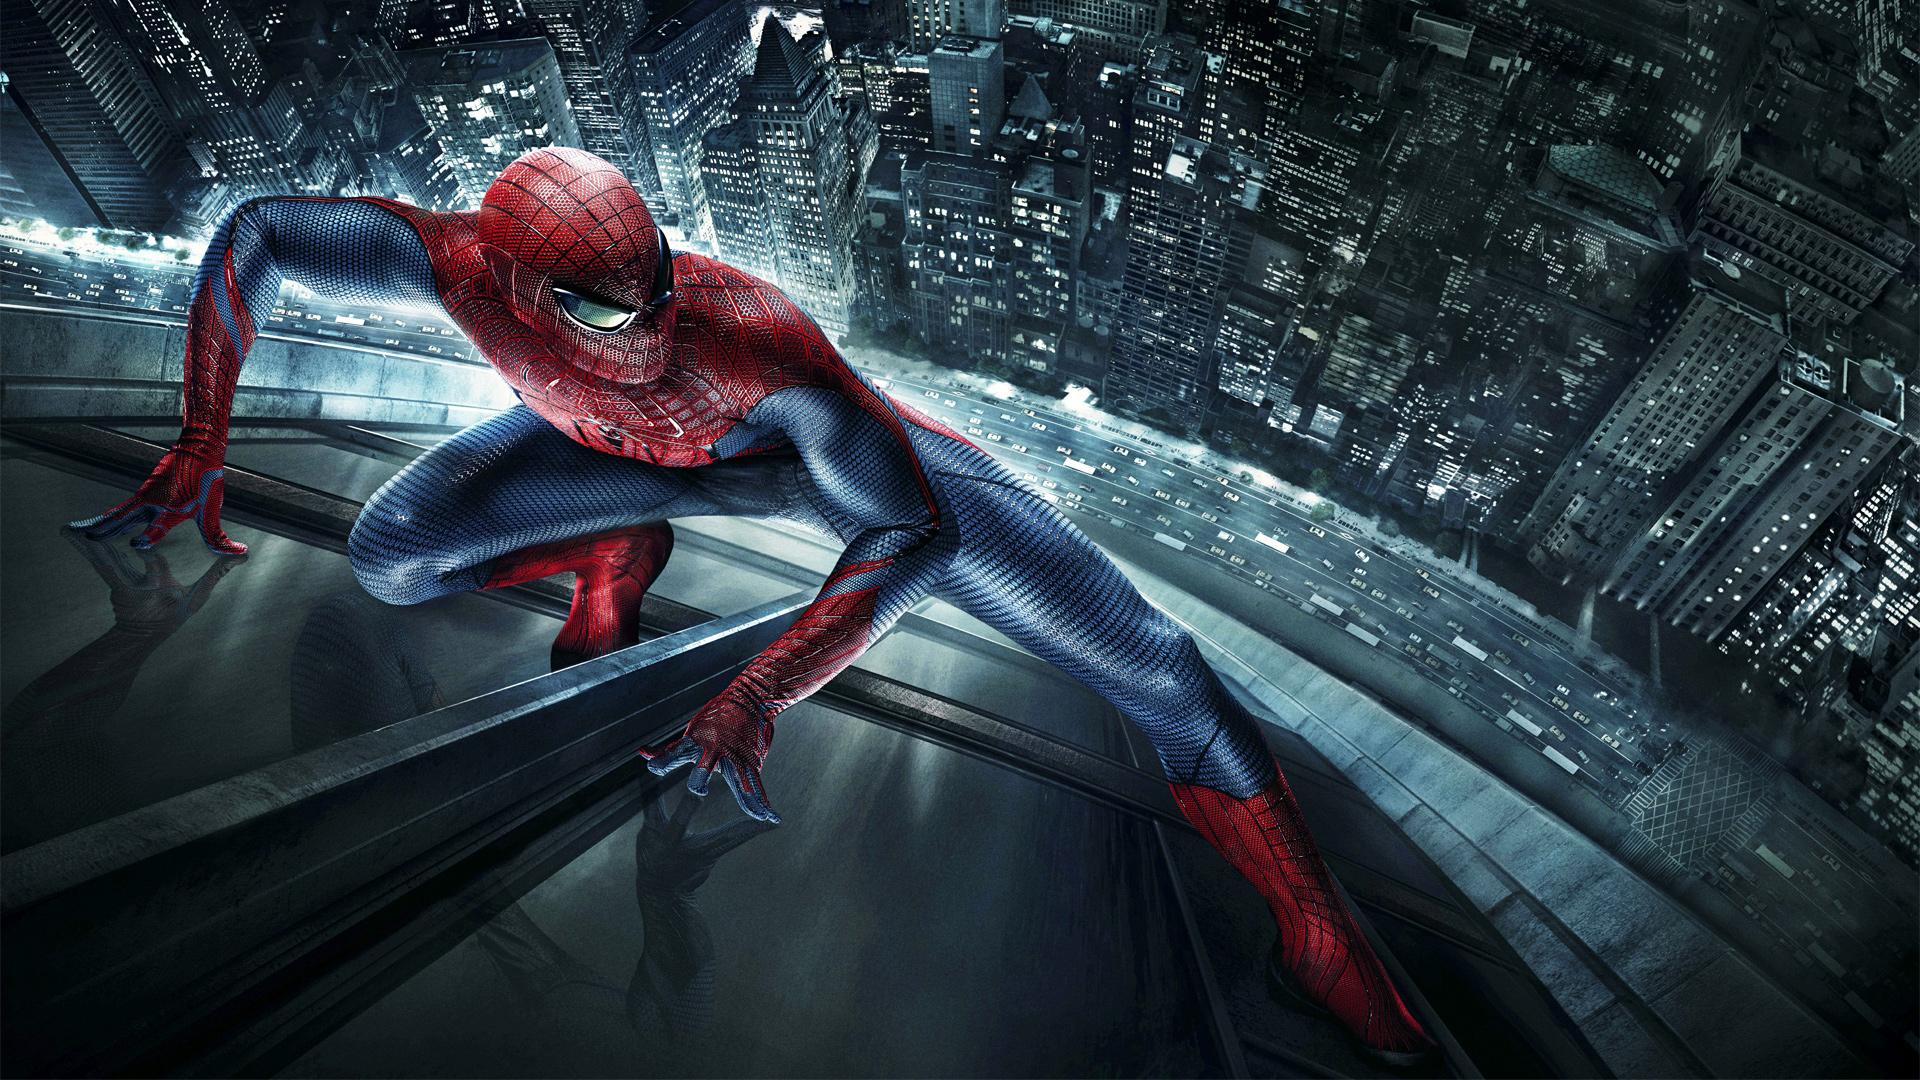 THE AMAZING SPIDER-MAN Spiderman over the window Wallpaper